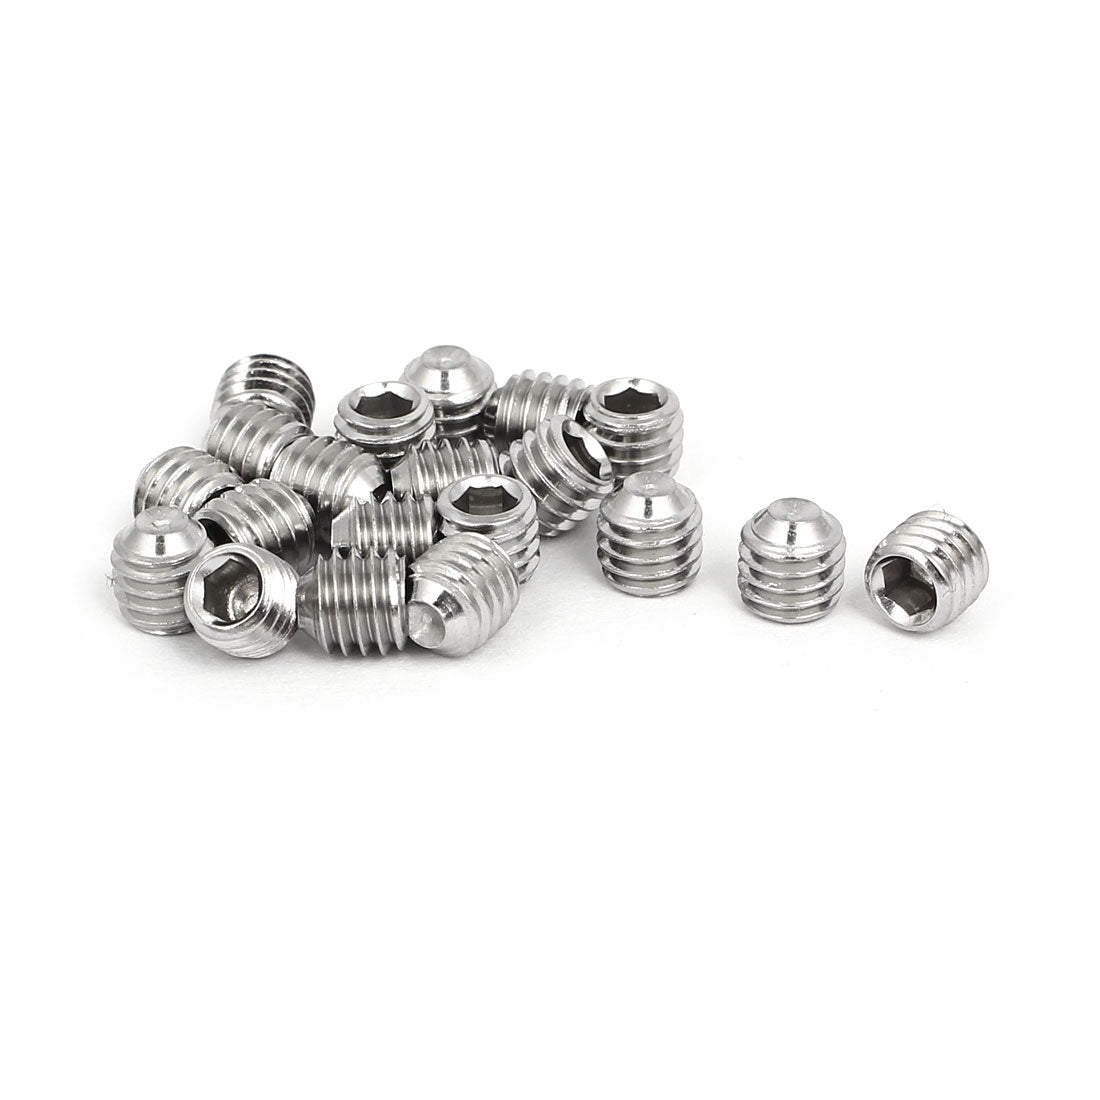 uxcell Uxcell M6x6mm 316 Stainless Steel Hex Socket Cup Point Grub Set Screws 20pcs